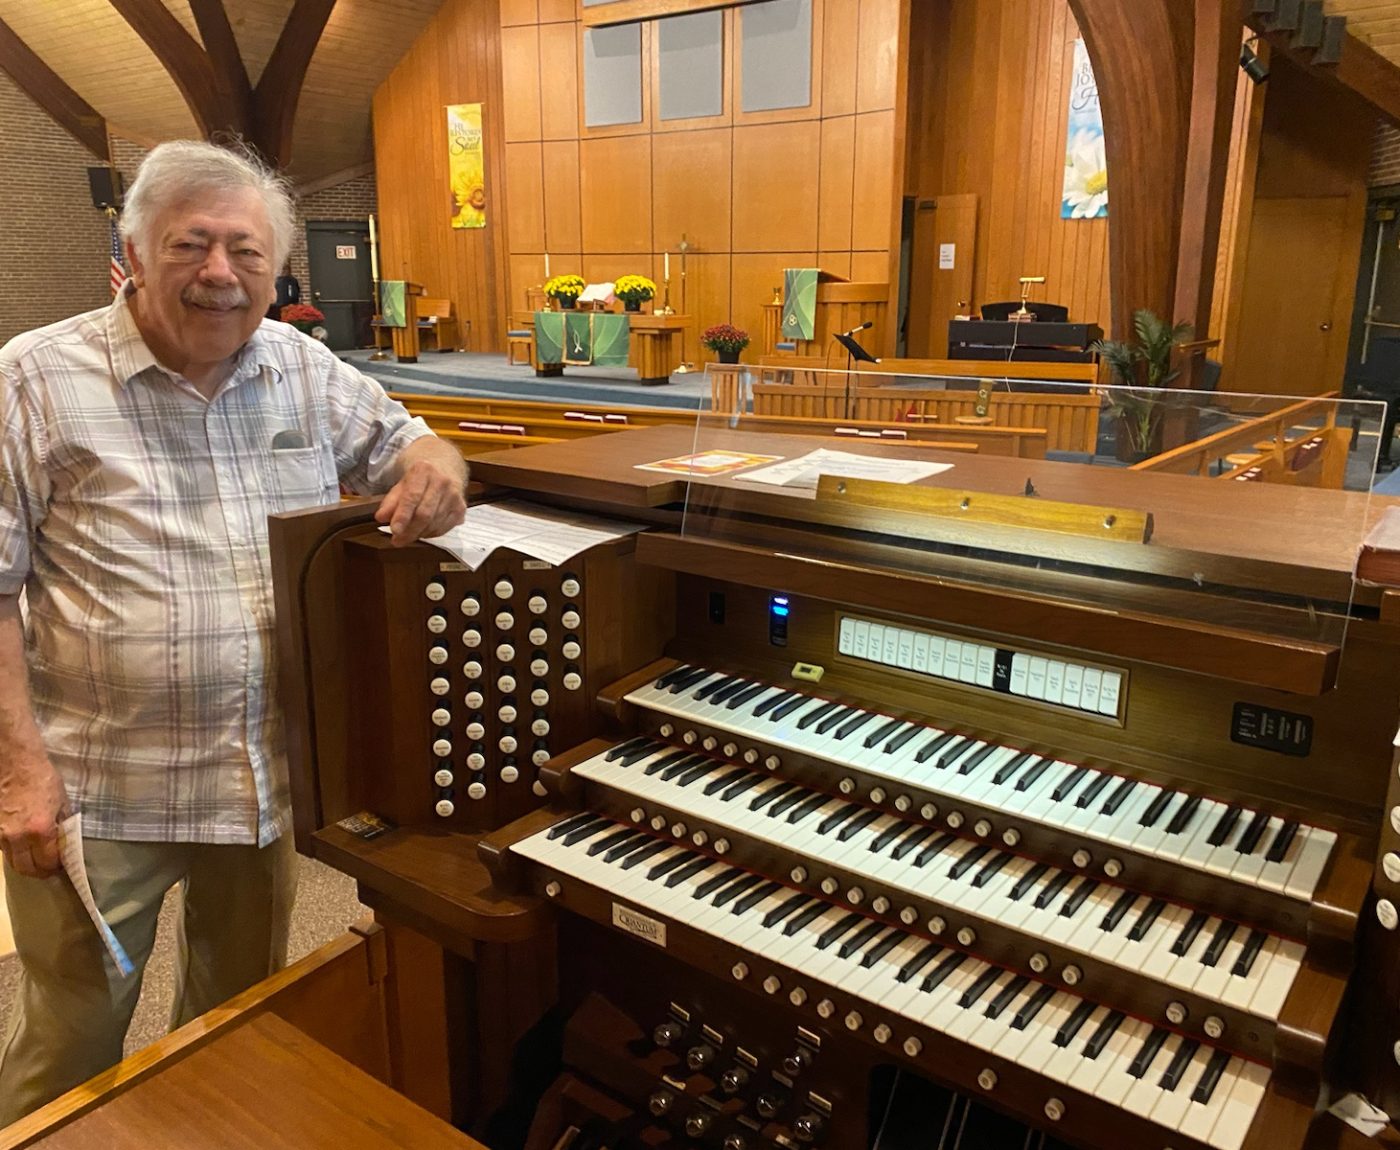 Dick with new organ